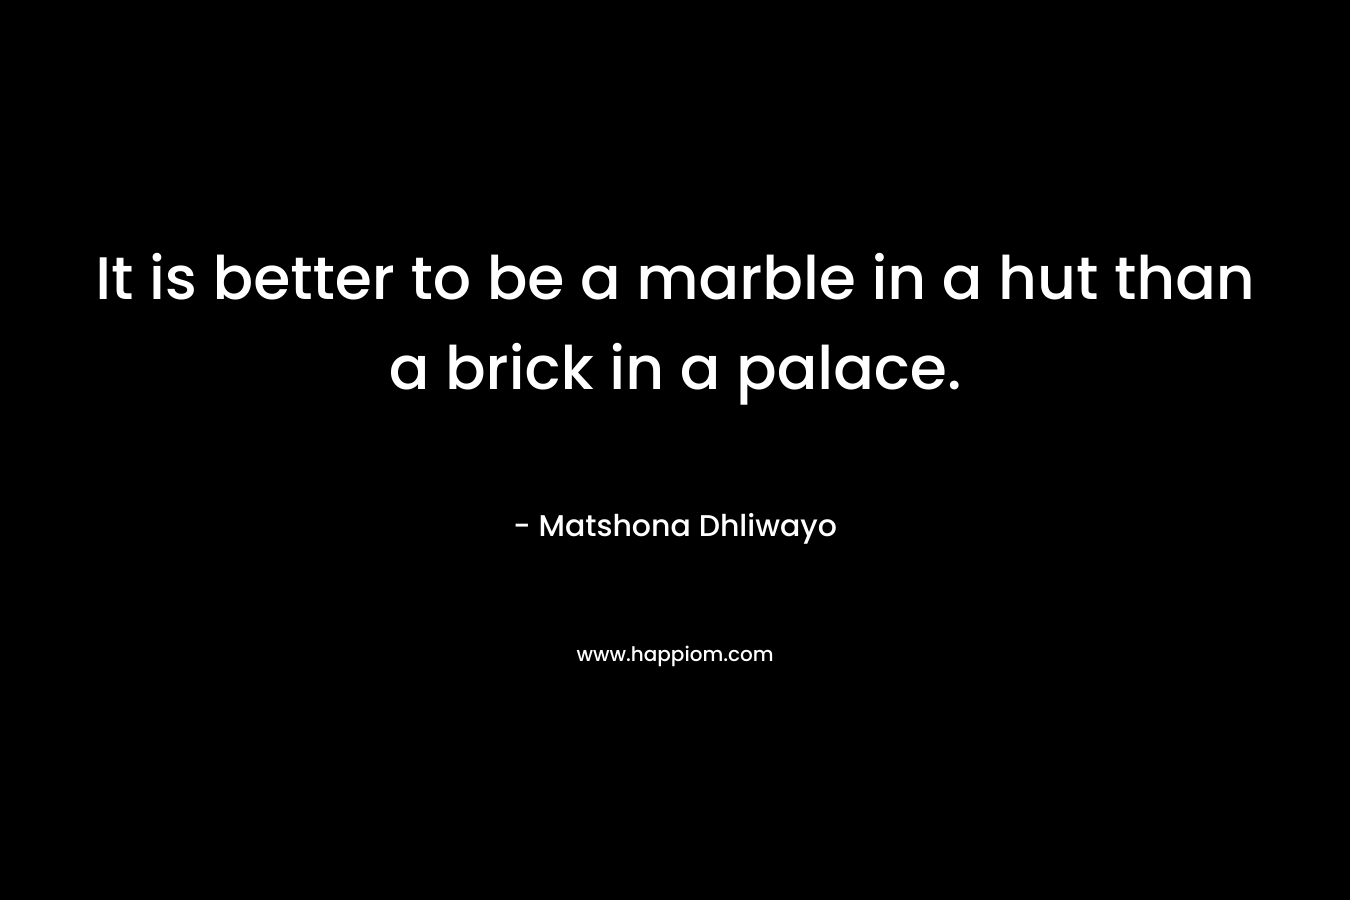 It is better to be a marble in a hut than a brick in a palace.